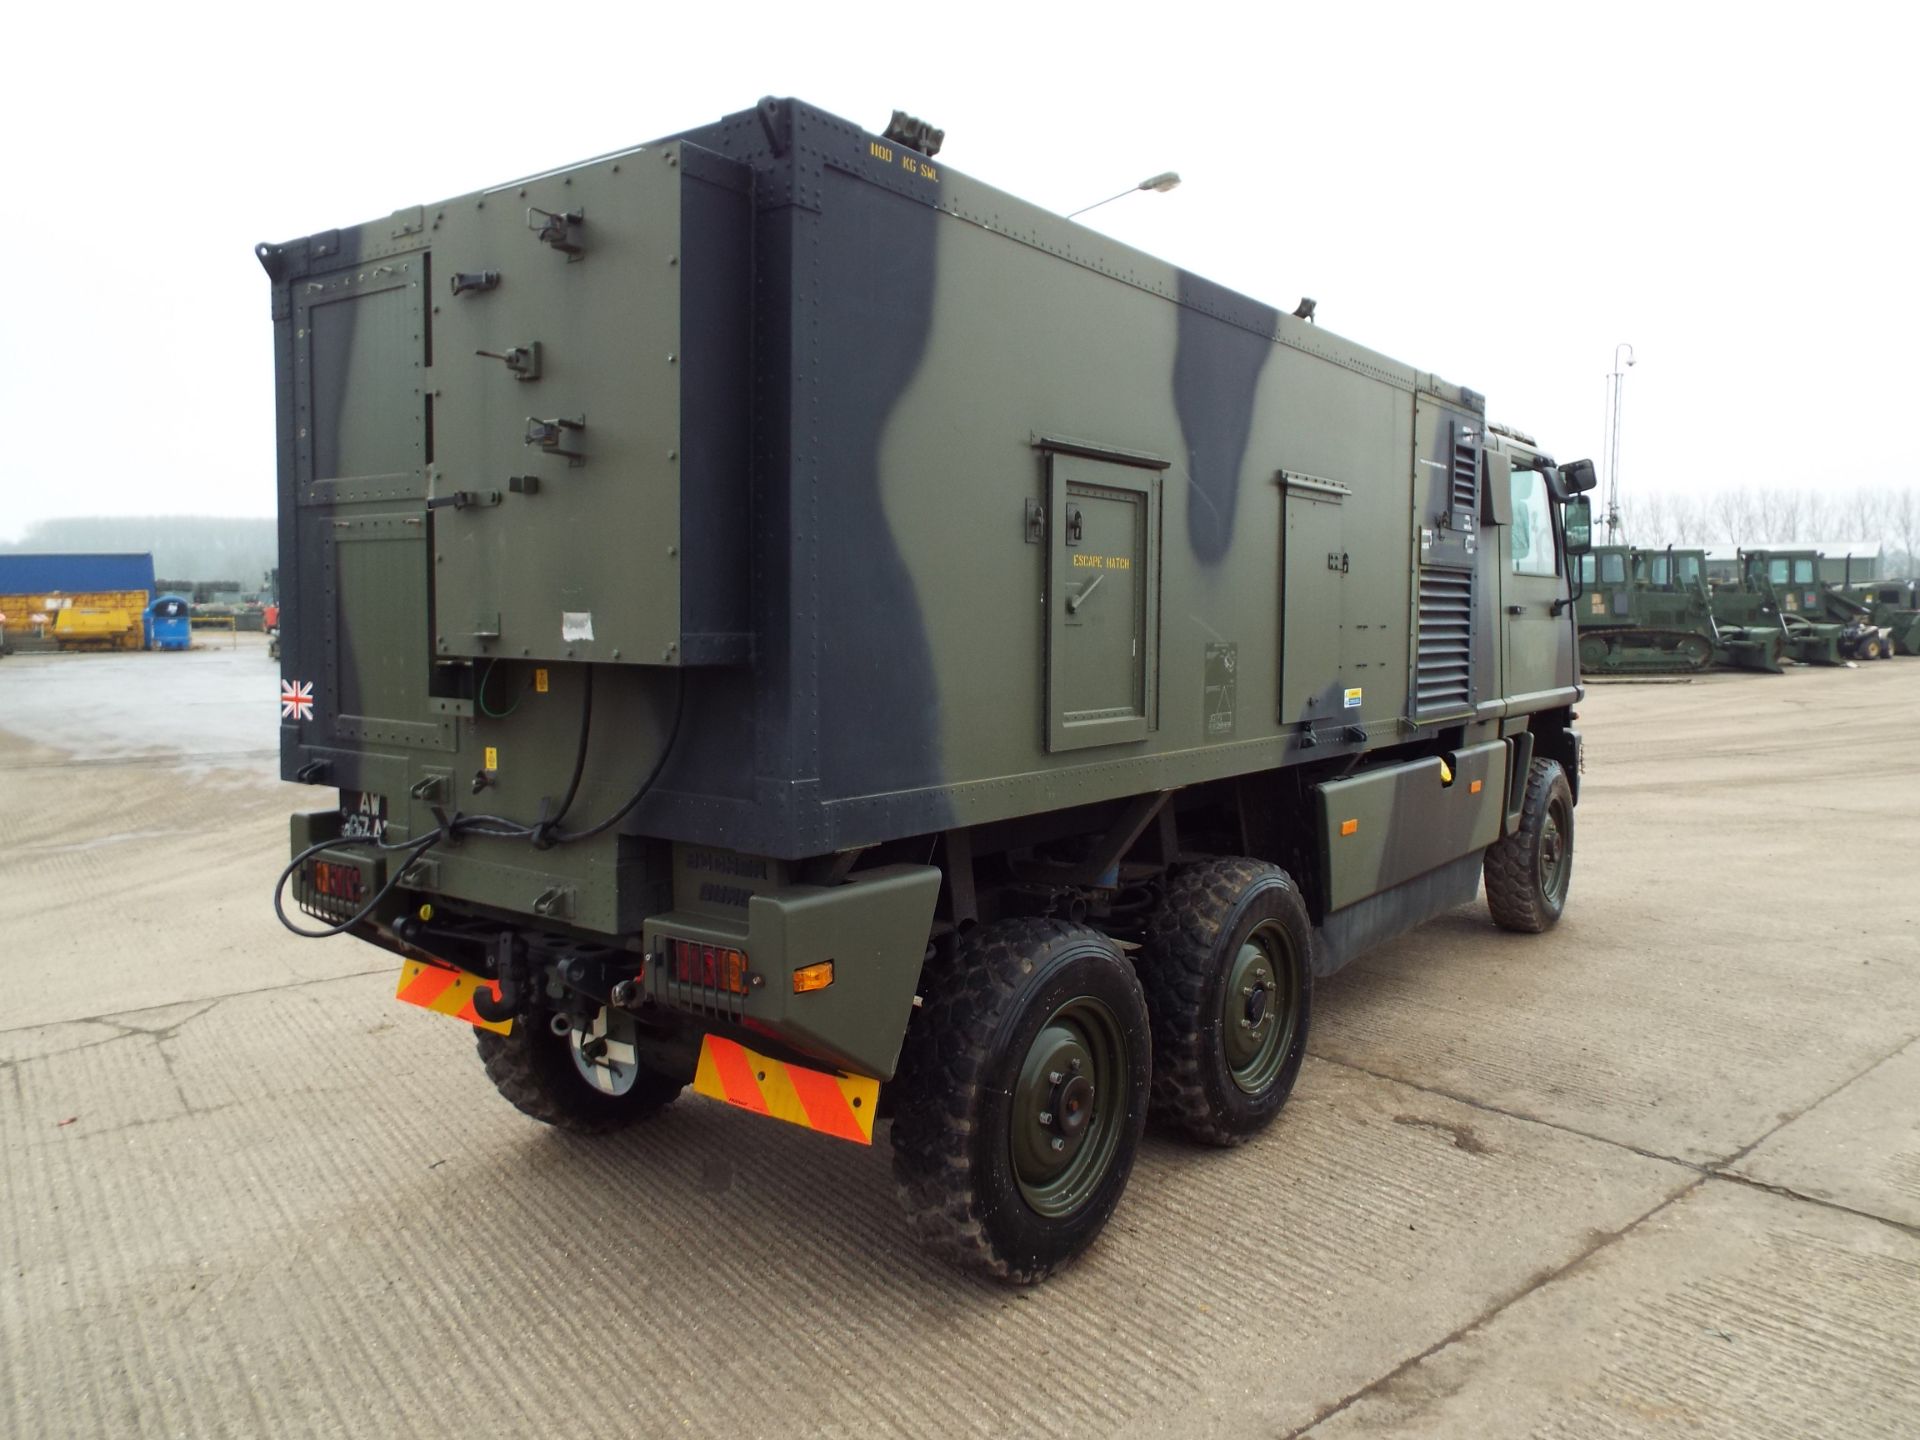 Ex Reserve Left Hand Drive Mowag Bucher Duro II 6x6 High-Mobility Tactical Vehicle - Image 7 of 31